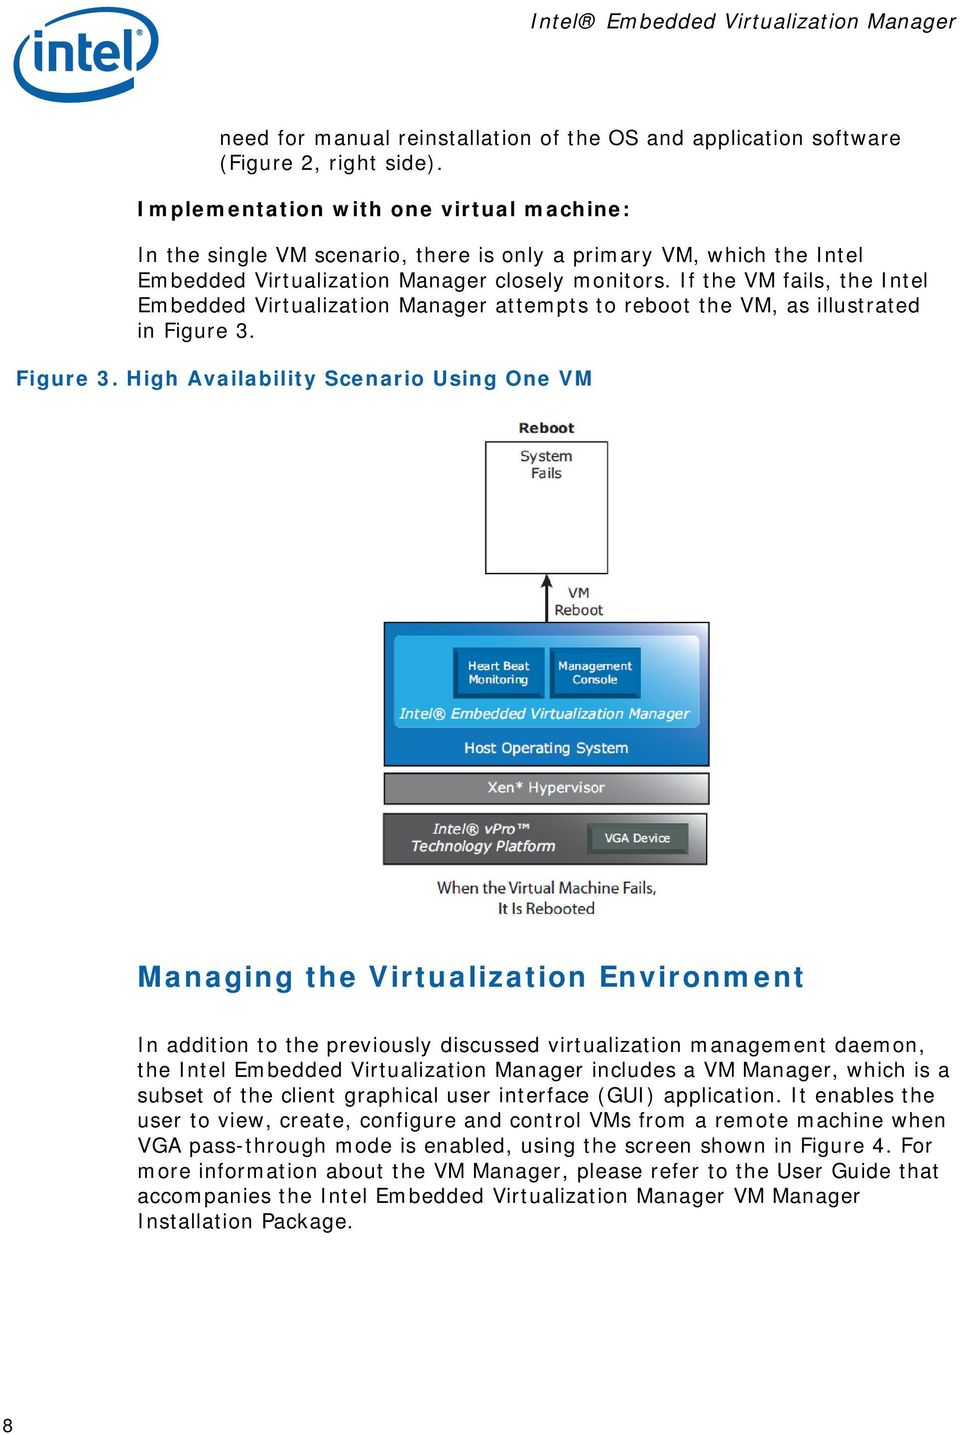 If the VM fails, the Intel Embedded Virtualization Manager attempts to reboot the VM, as illustrated in Figure 3.